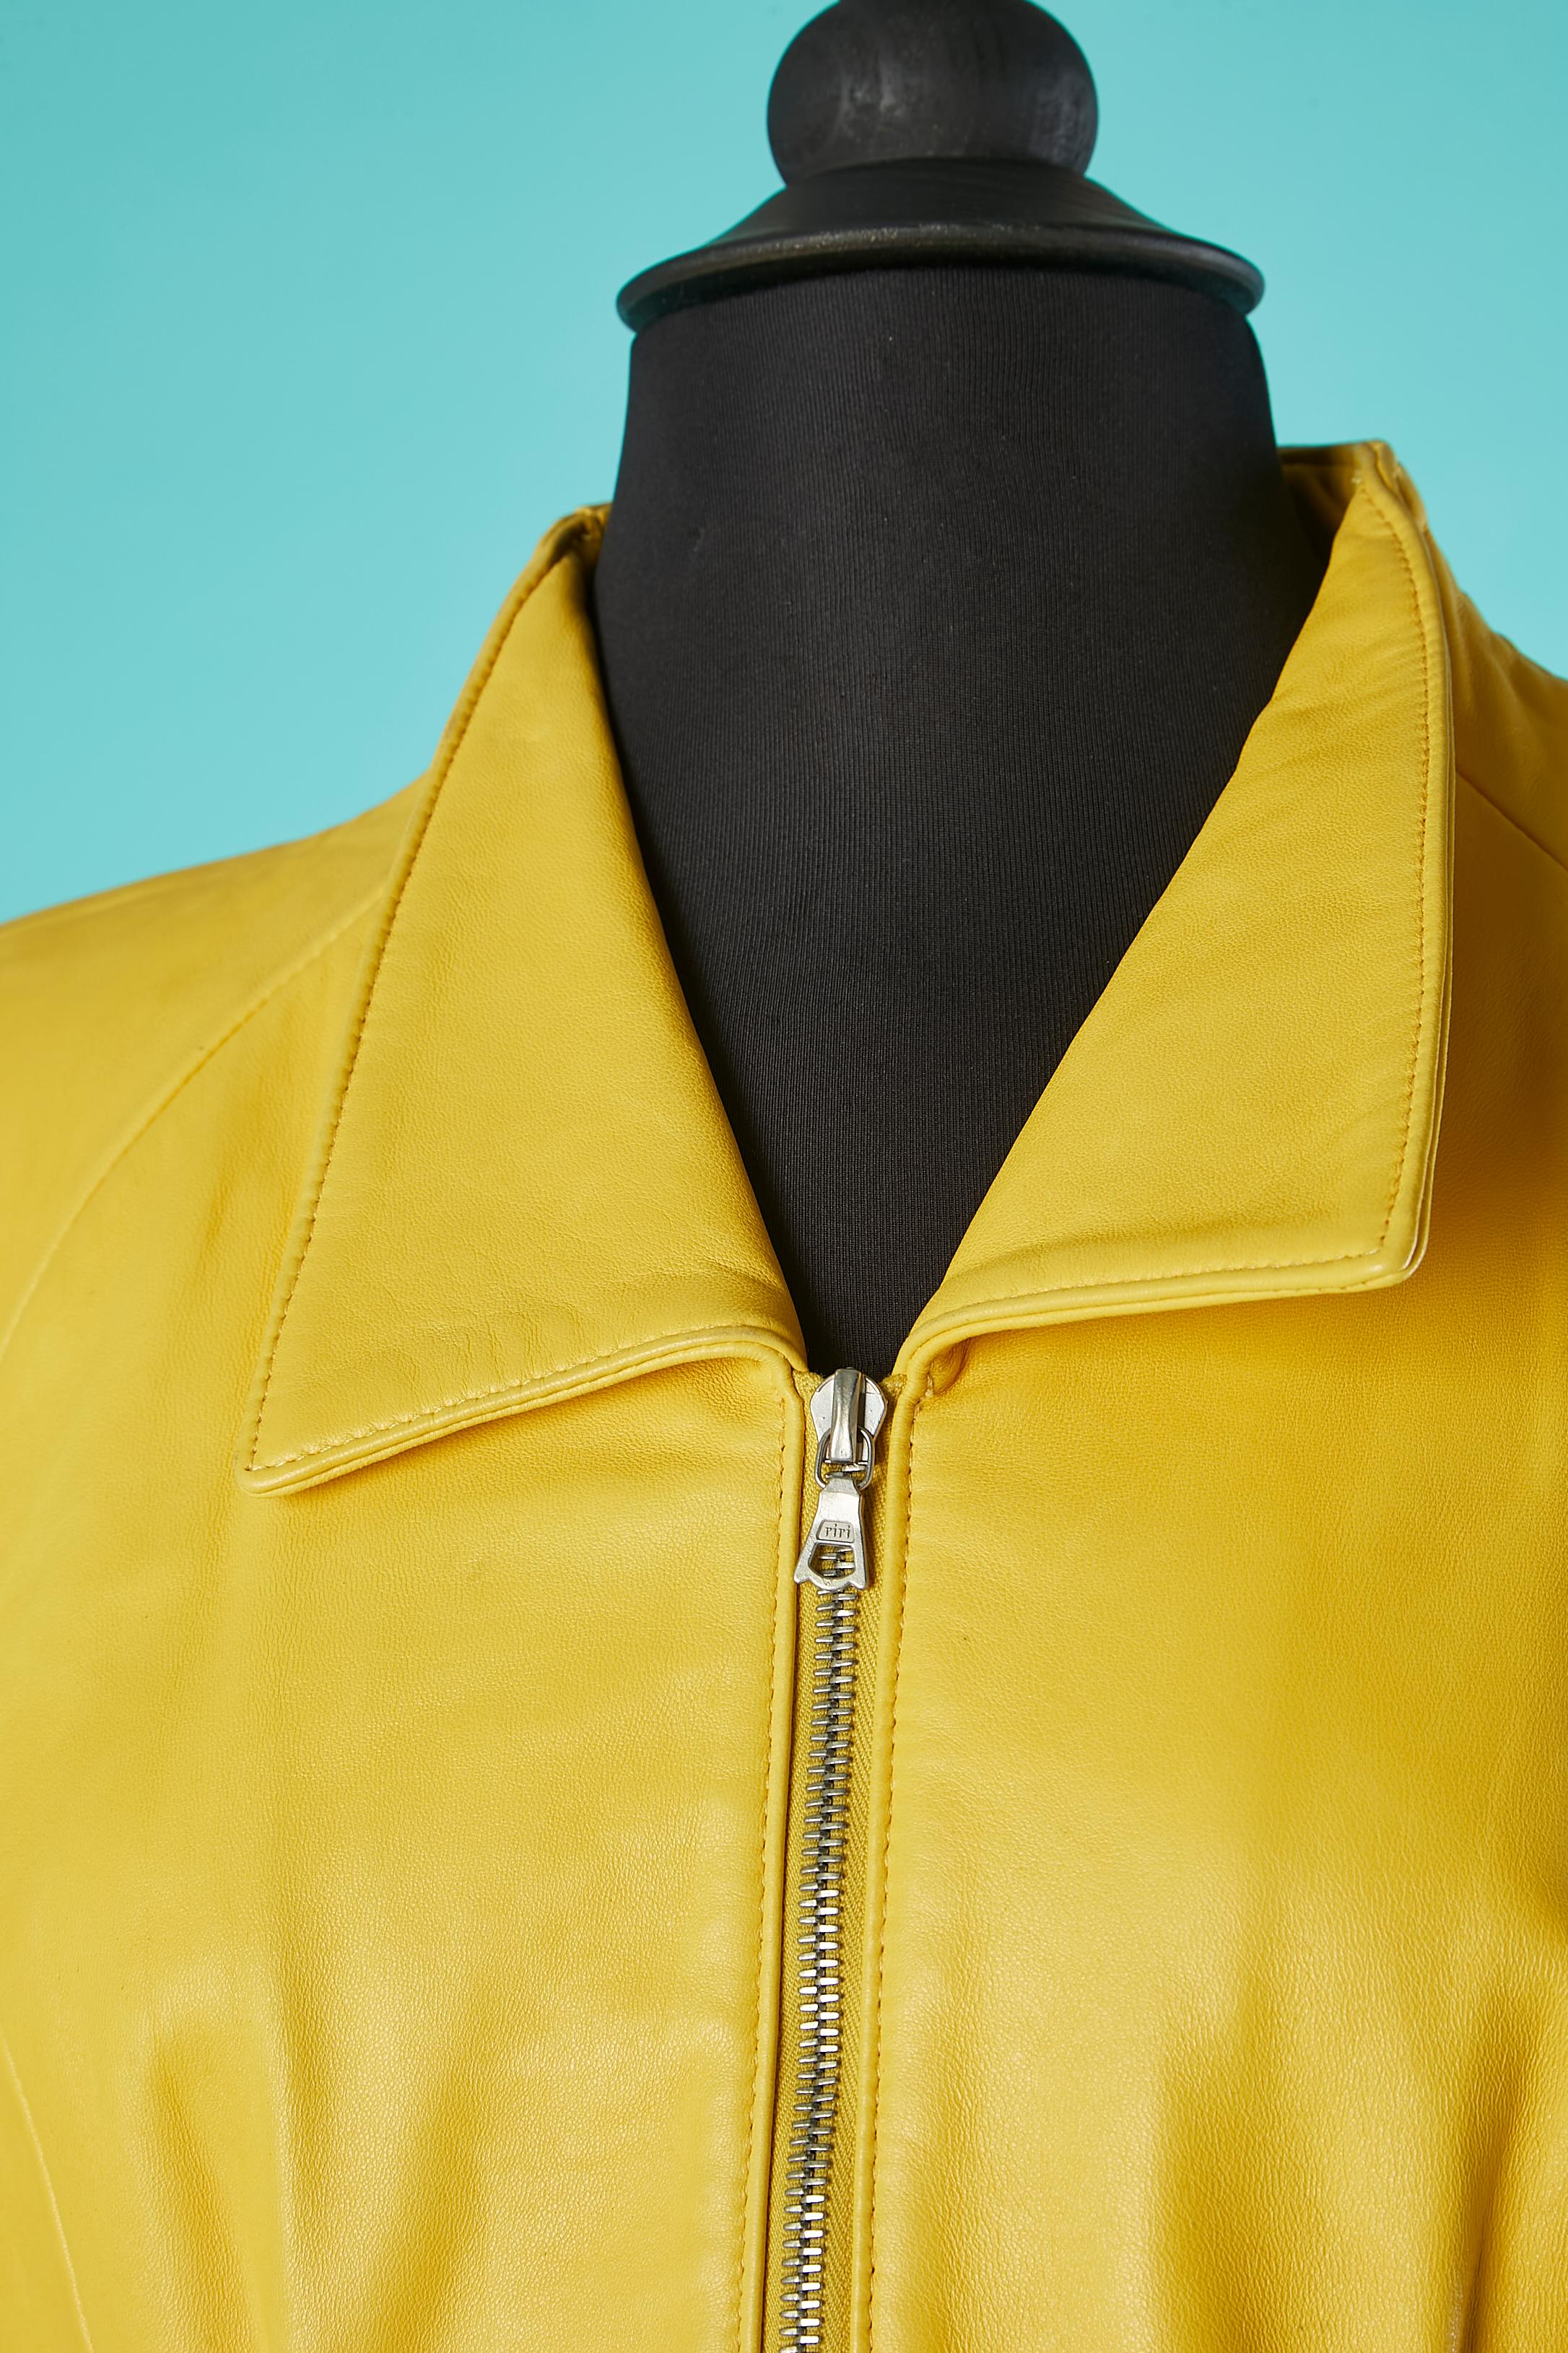 Yellow leather skirt-suit. Rayon lining. 
Raglan sleeves. Zip middle front, on pockets and cuffs. Shoulder-pads. Cut-work.
SIZE 7/8 ( on tag) but fit M ( jacket ) and XS ( skirt) 